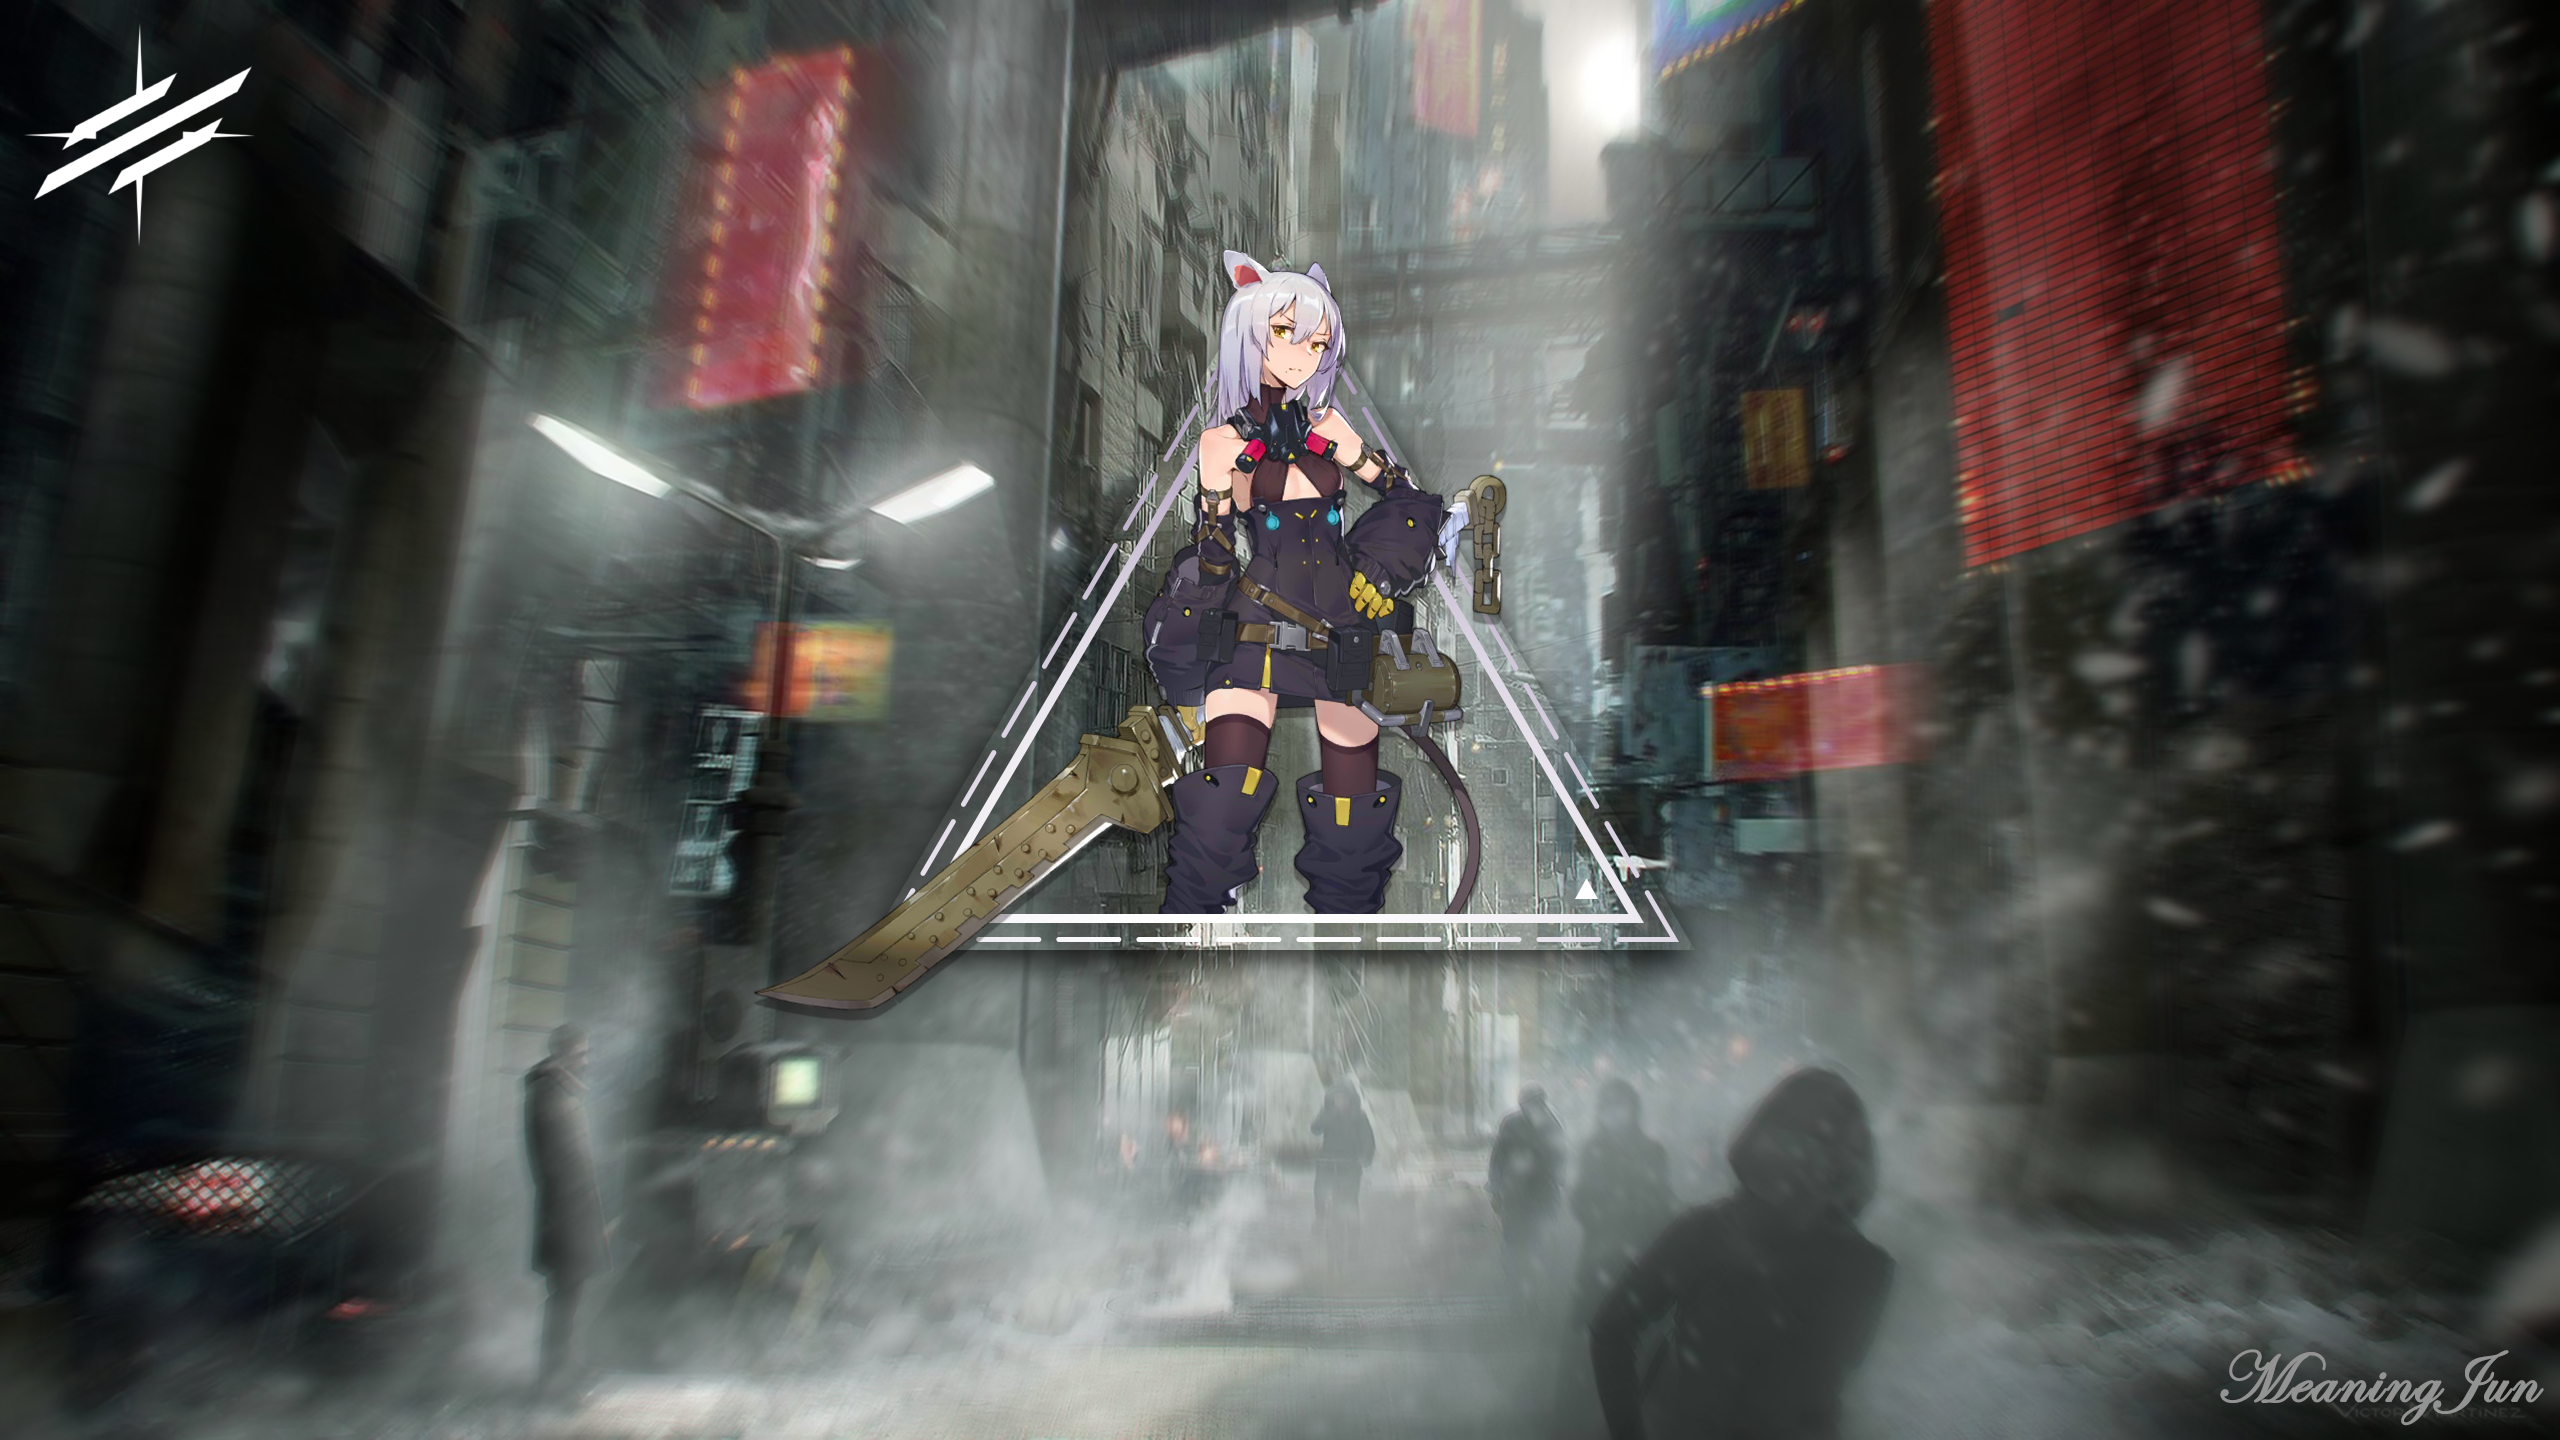 2D Anime Girls Anime Picture In Picture MeaningJun Digital Art Street City Futuristic City Fantasy A 2560x1440